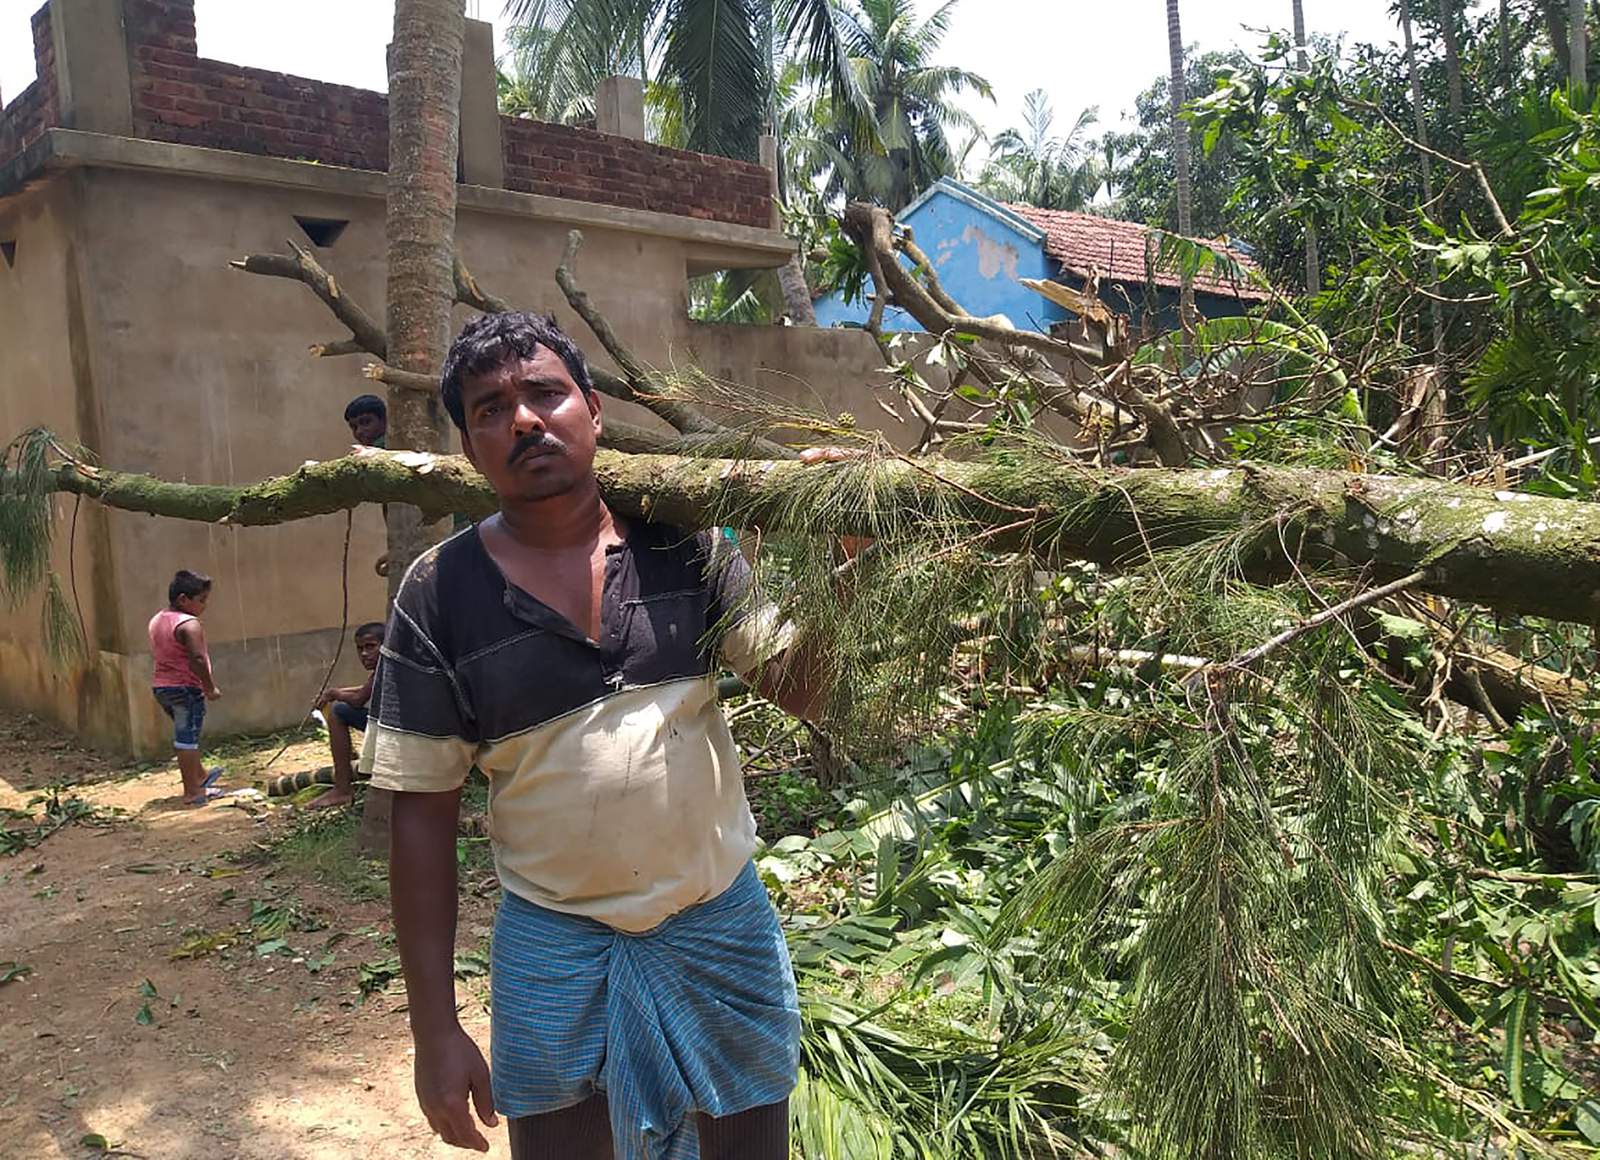 India struggles with twin challenges of cyclone and pandemic